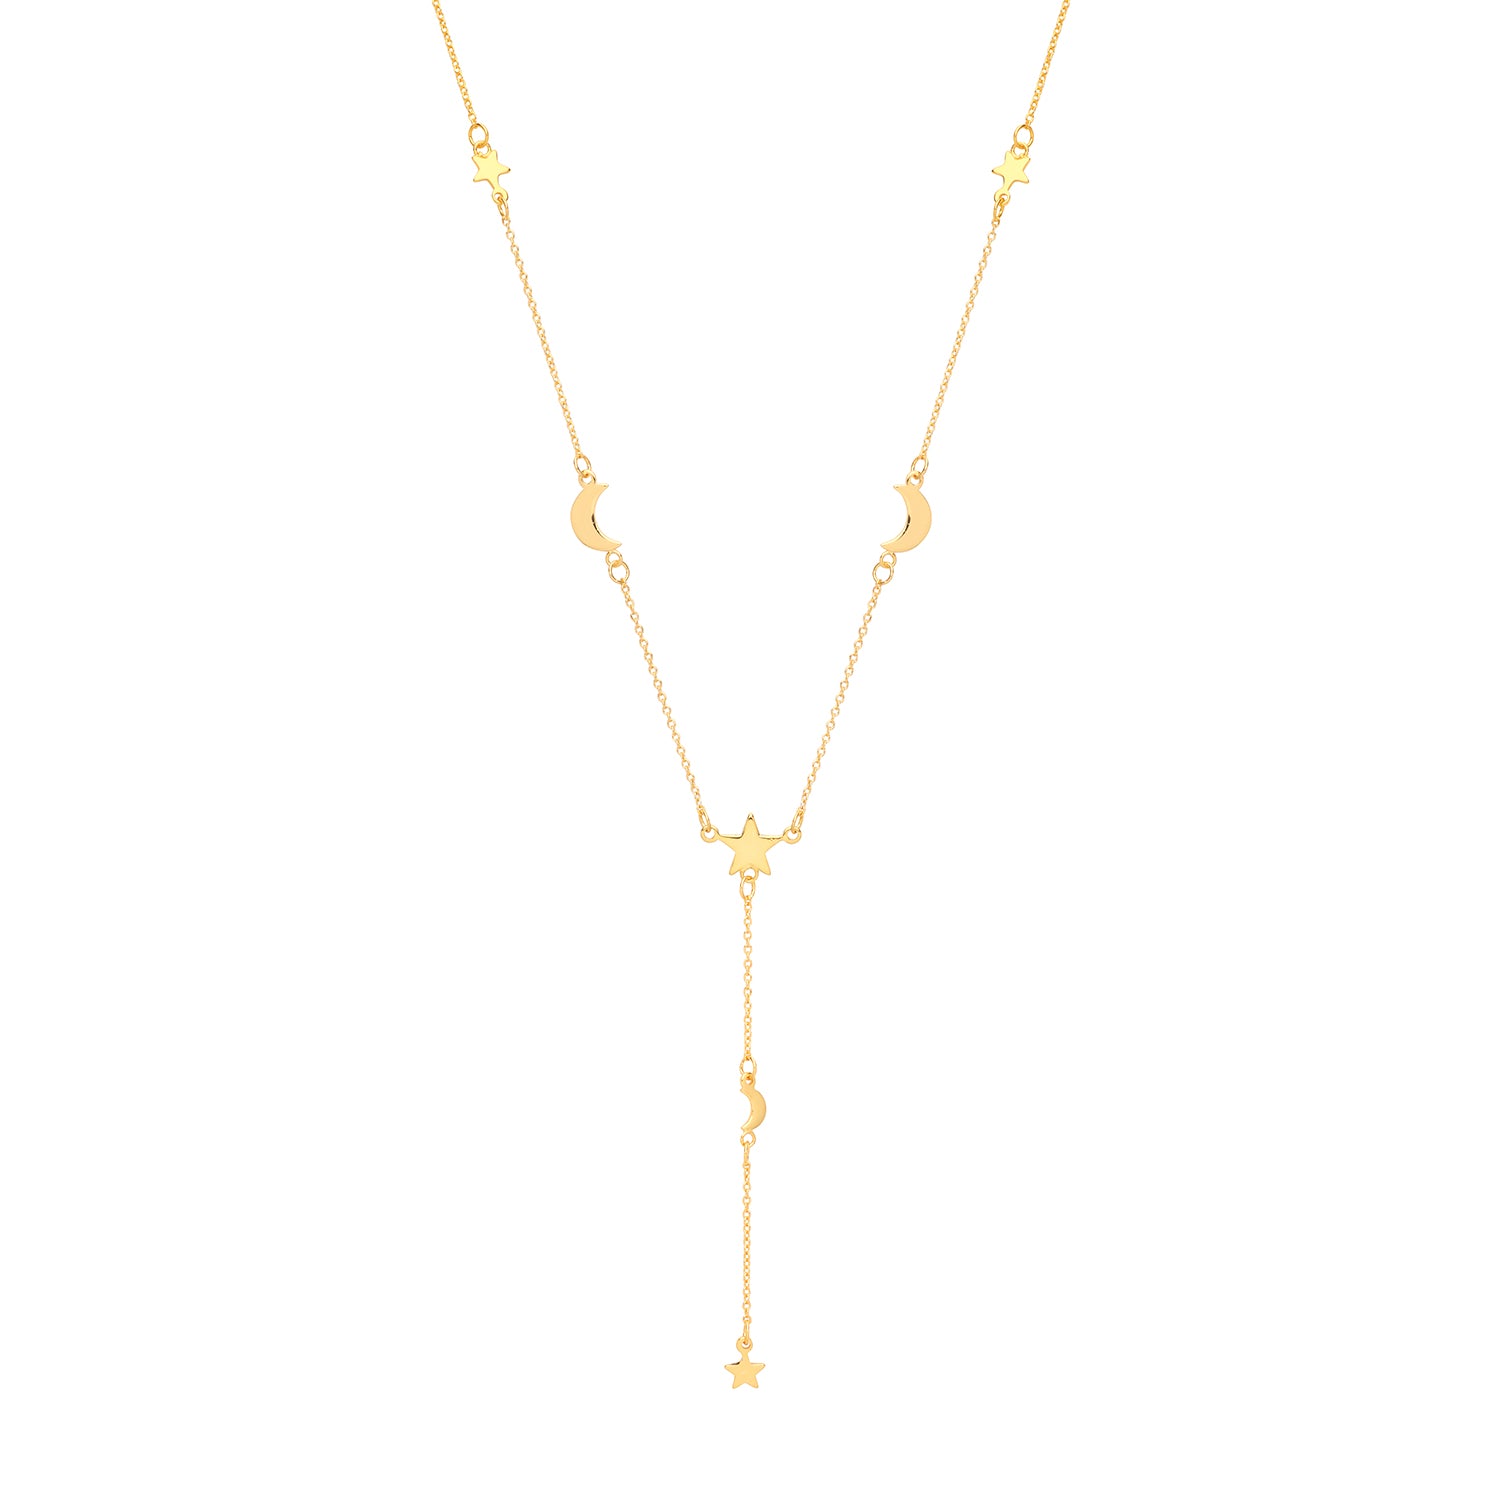 SILVER YELLOW GOLD PLATED CRESCENT MOON AND STARS DROP NECKLET